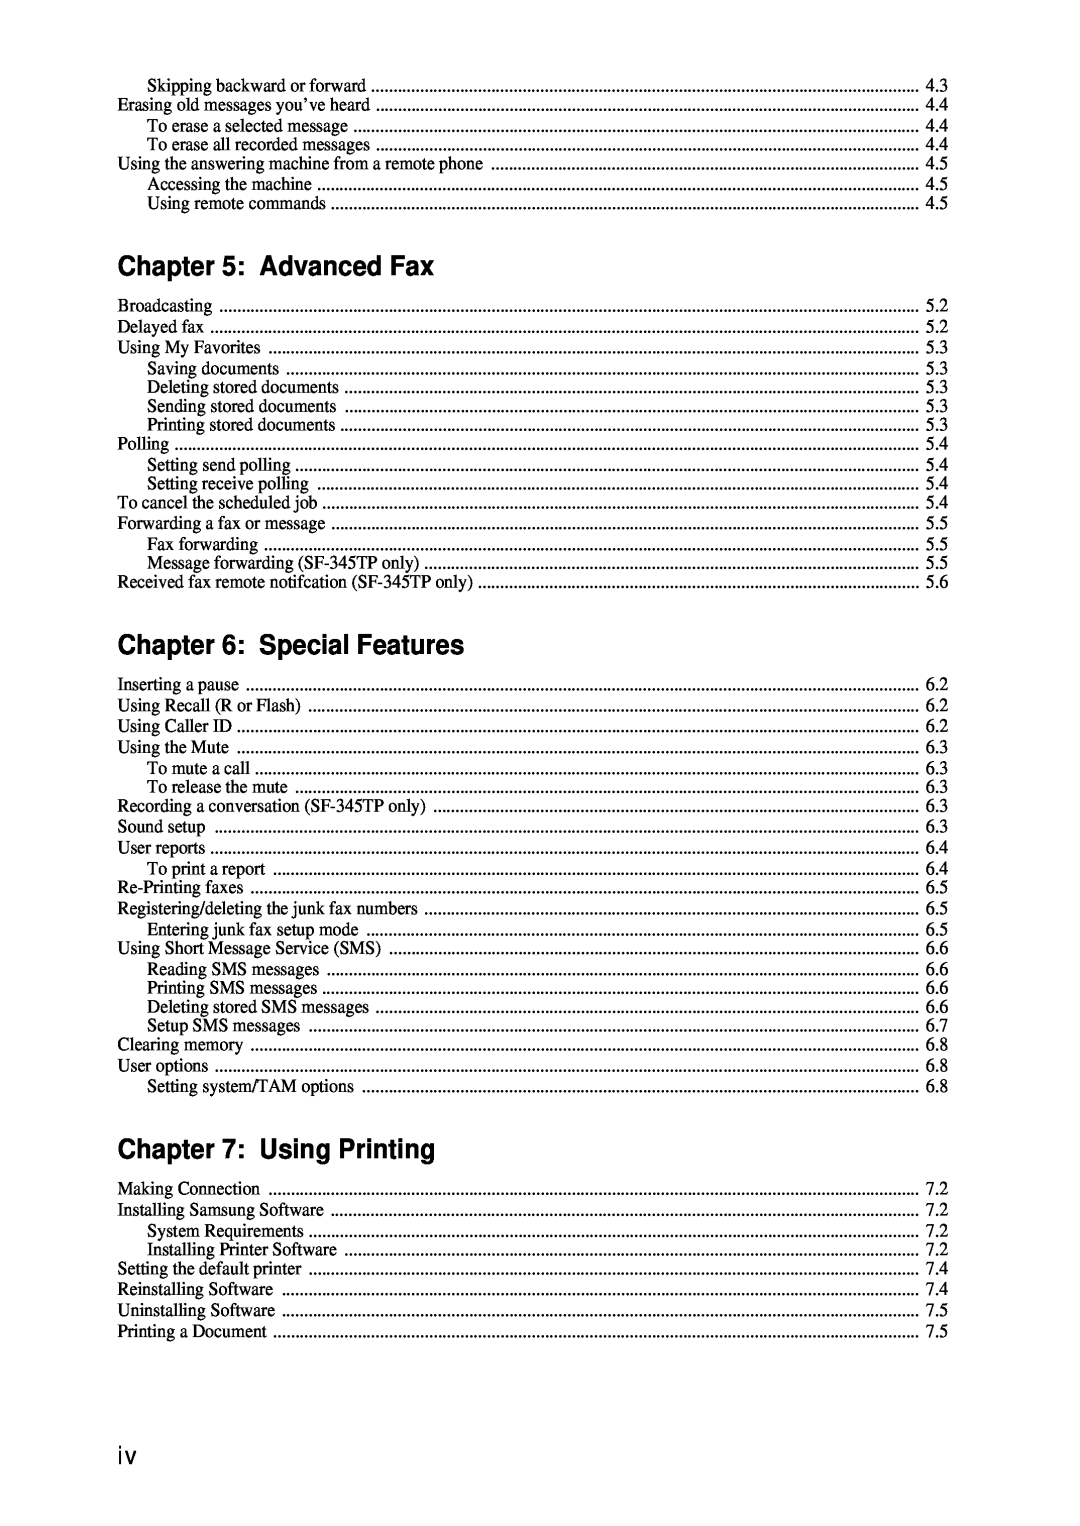 Samsung SF-340 Series manual Advanced Fax, Special Features, Using Printing 